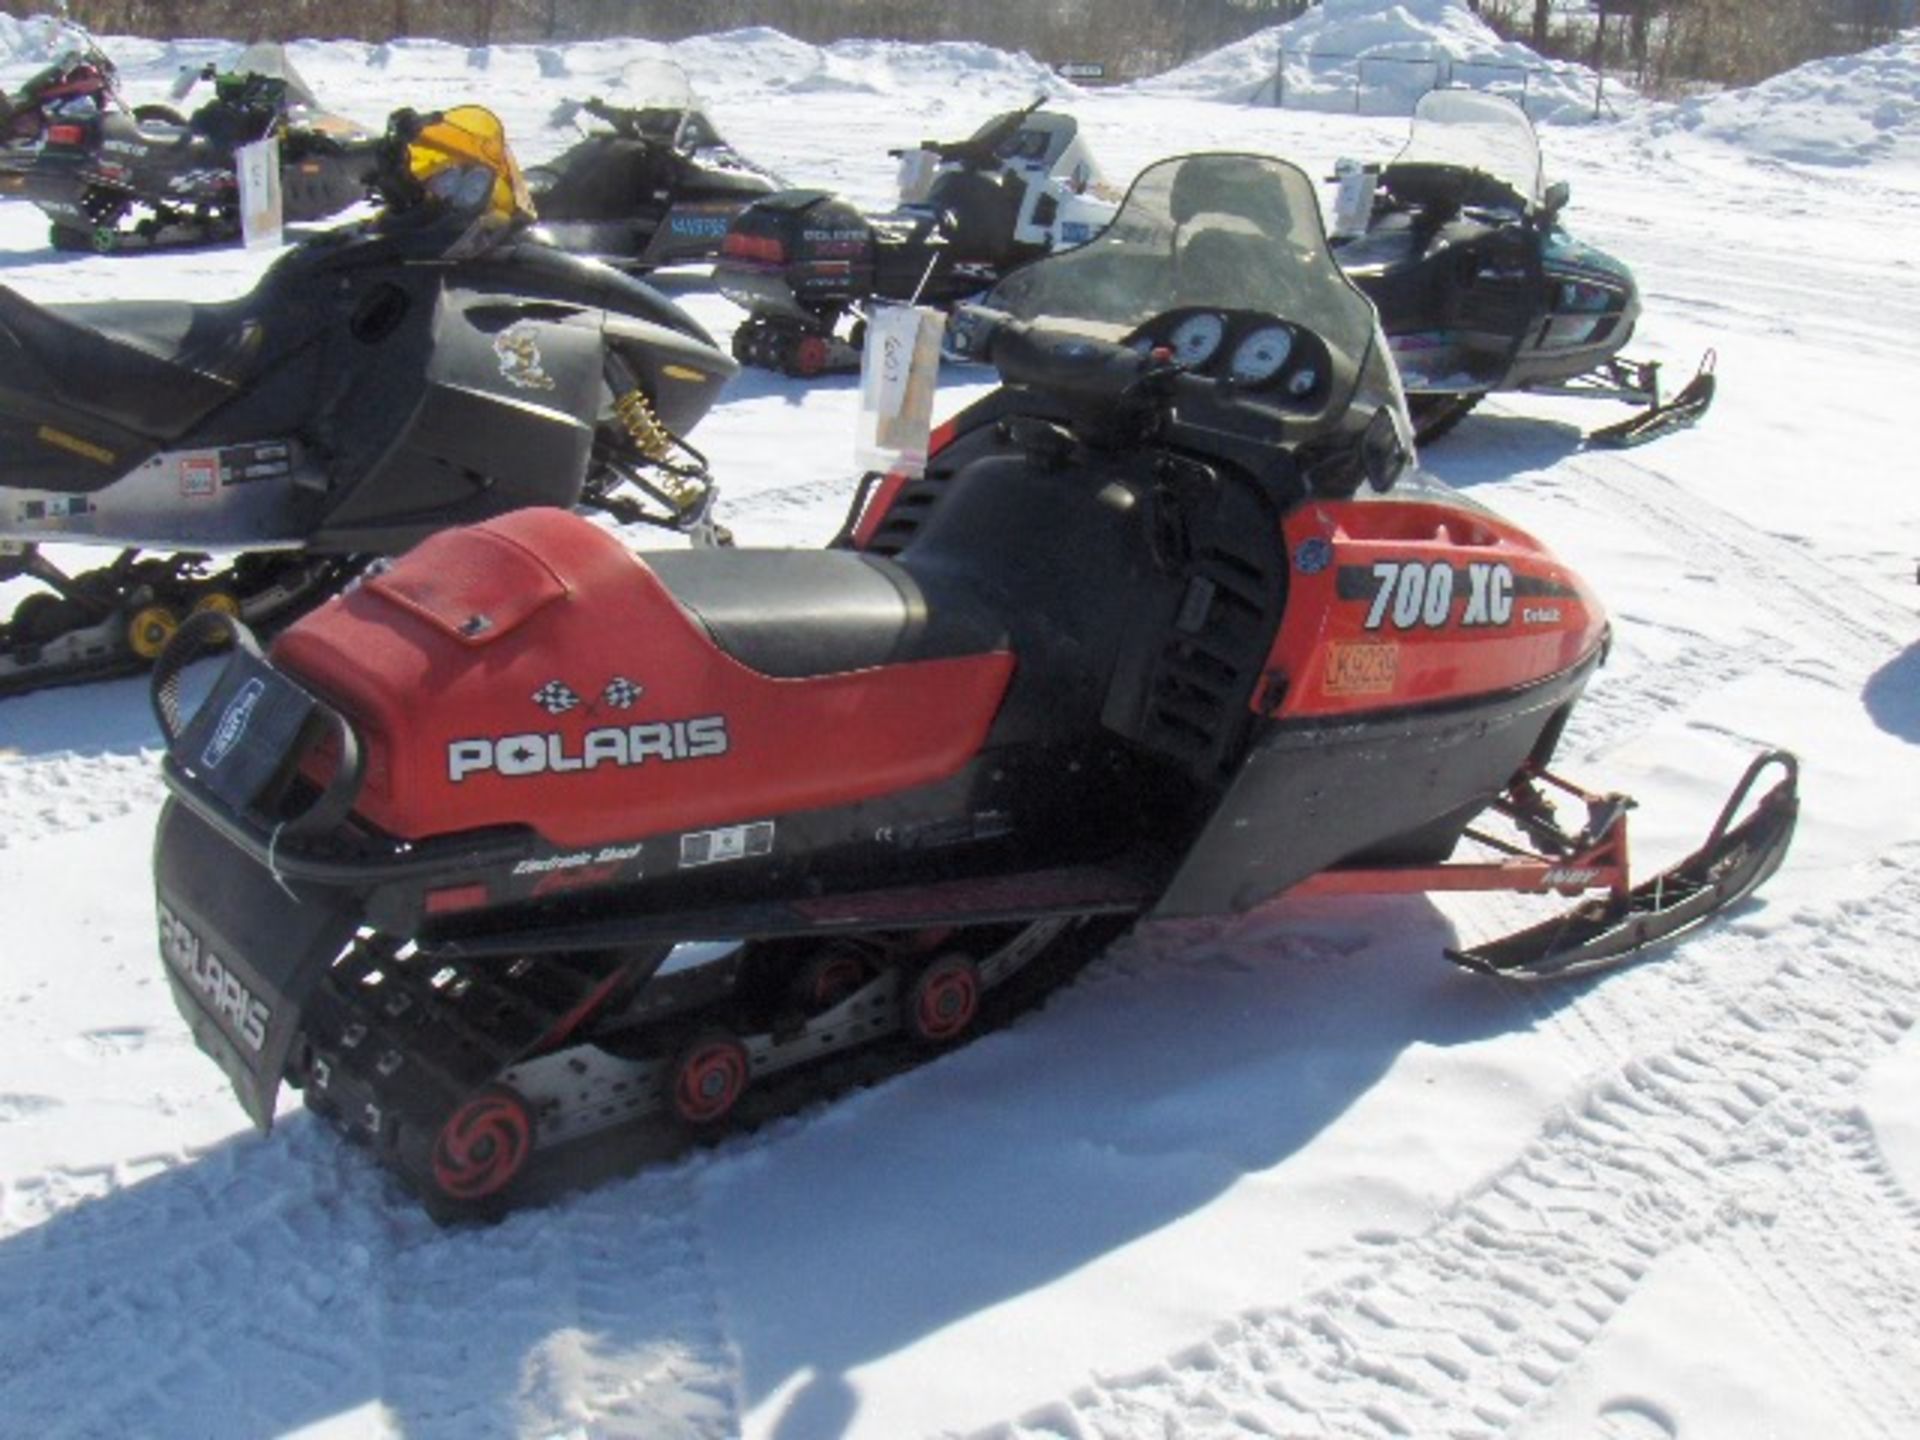 2000 POLARIS 700 XC DELUXE 4XASD7AS3YB051649 snowmobile, owner started at time of check-in, electric - Image 4 of 5